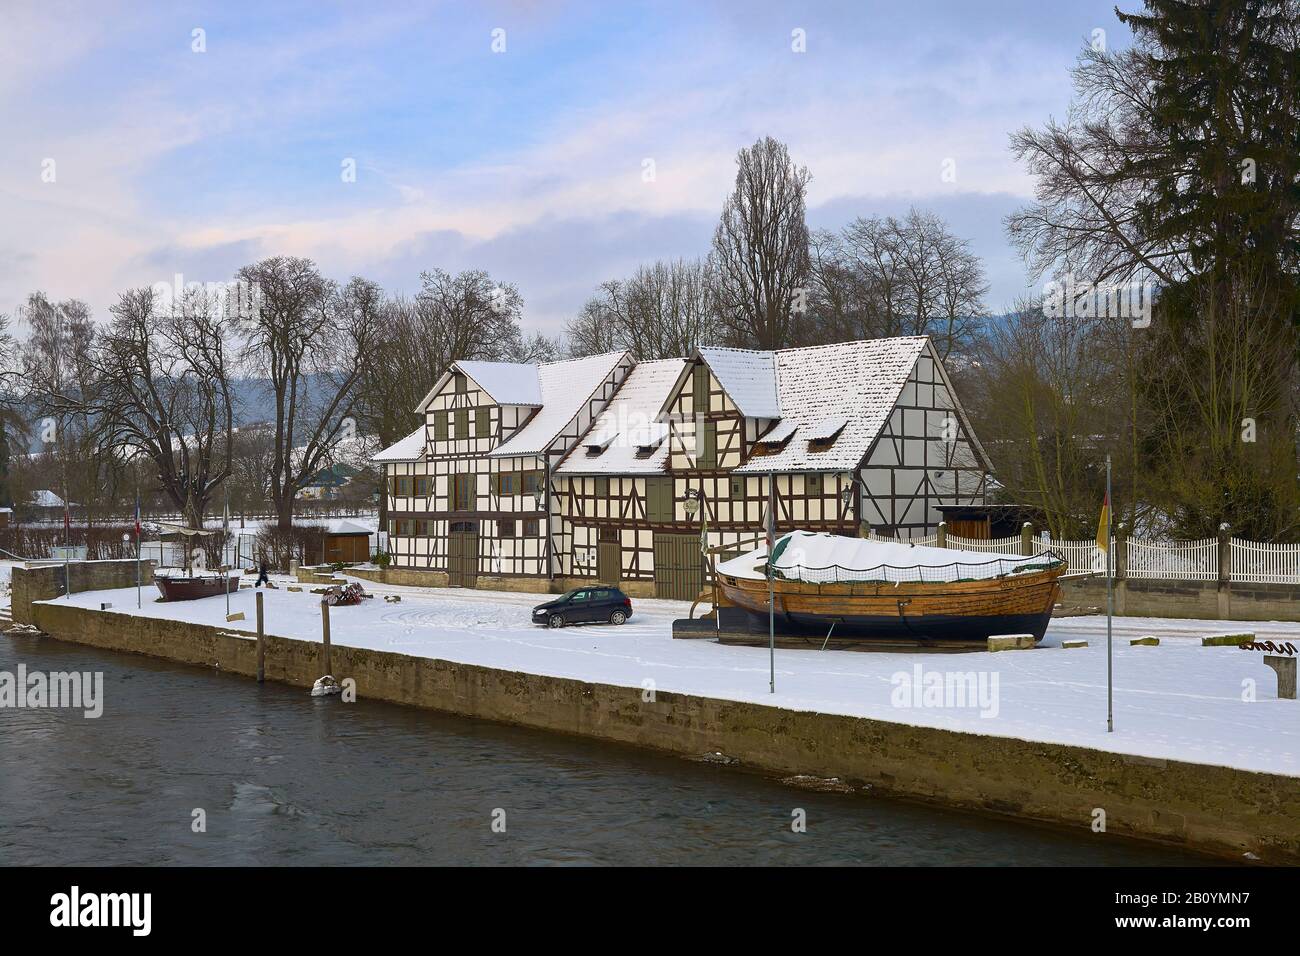 Old harbour at the Schlagd of Wanfried, Werra-Meissner district, Hesse, Germany, Stock Photo